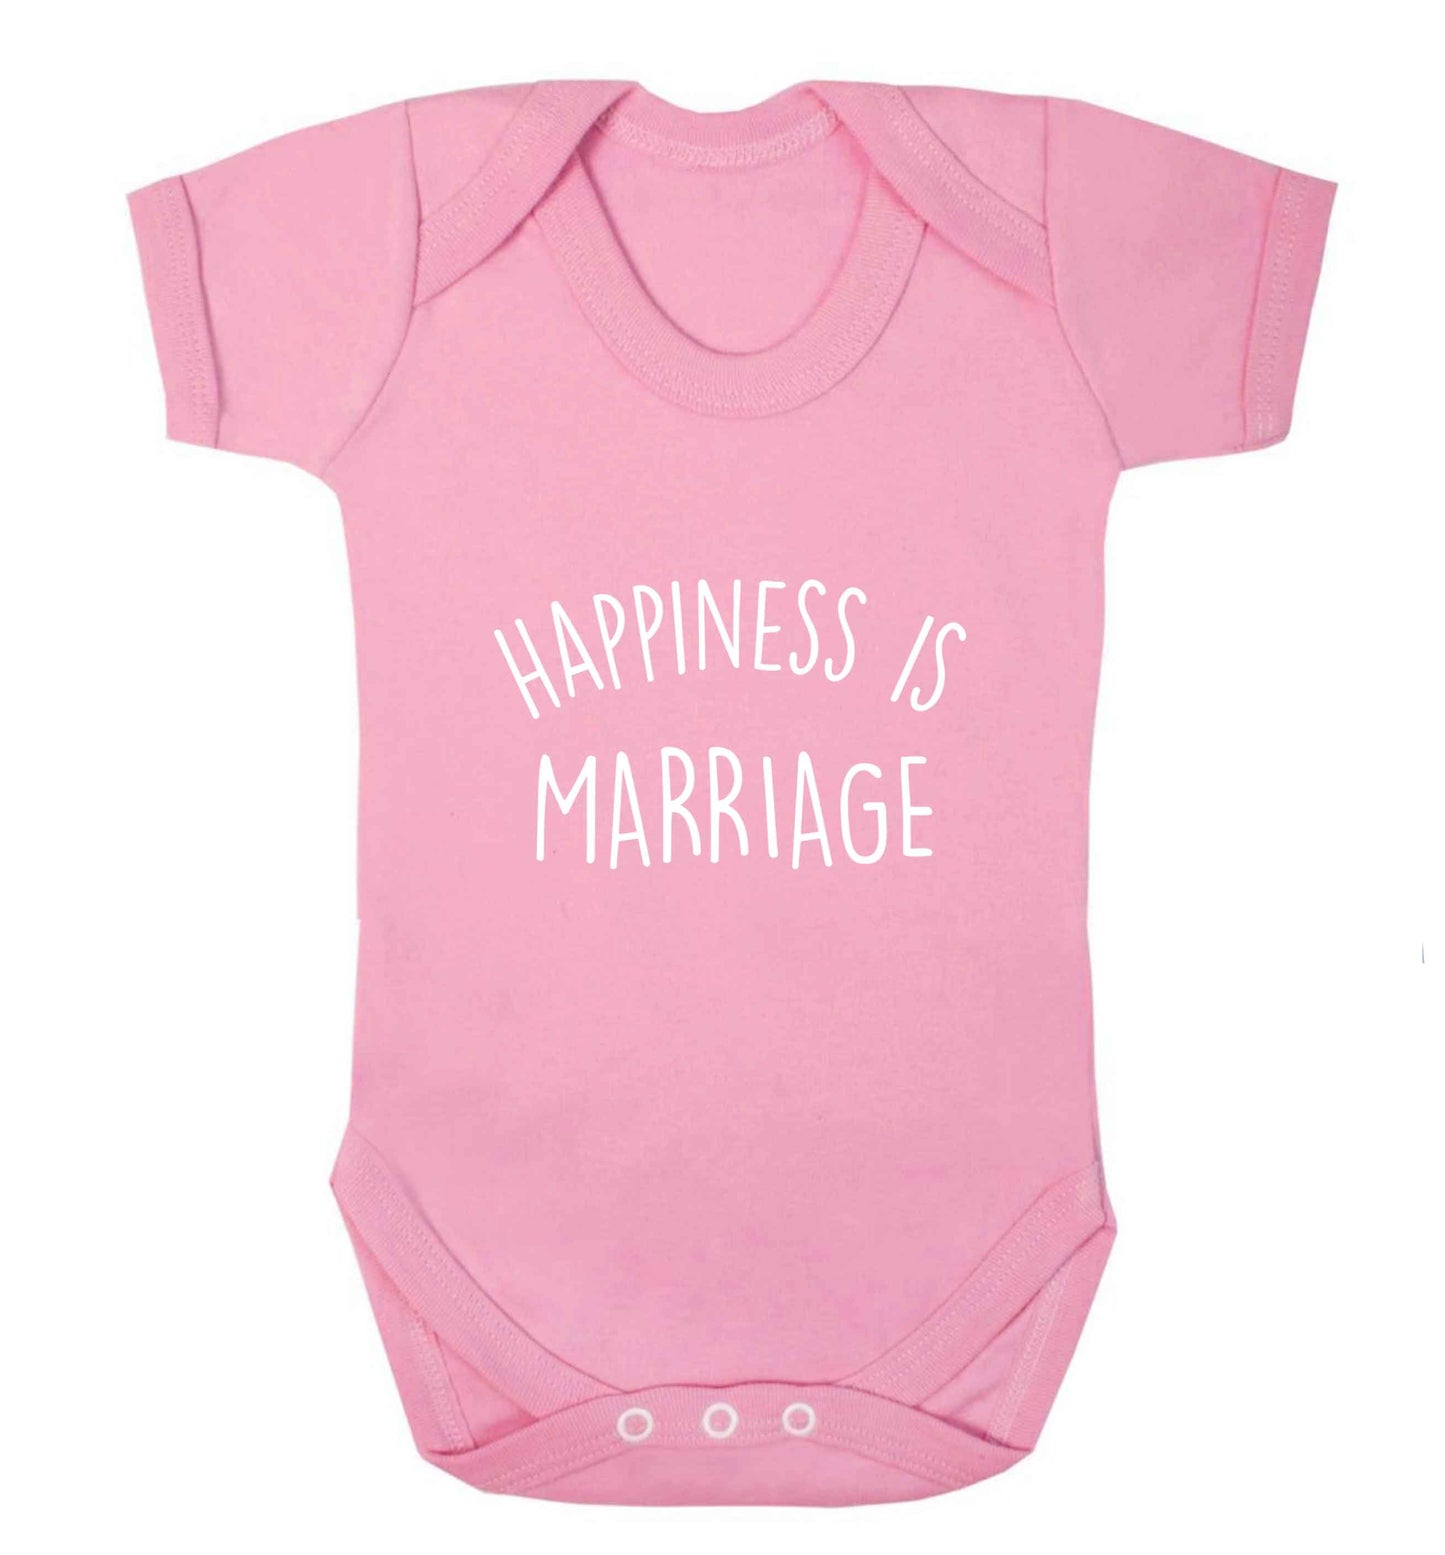 Happiness is wedding planning baby vest pale pink 18-24 months